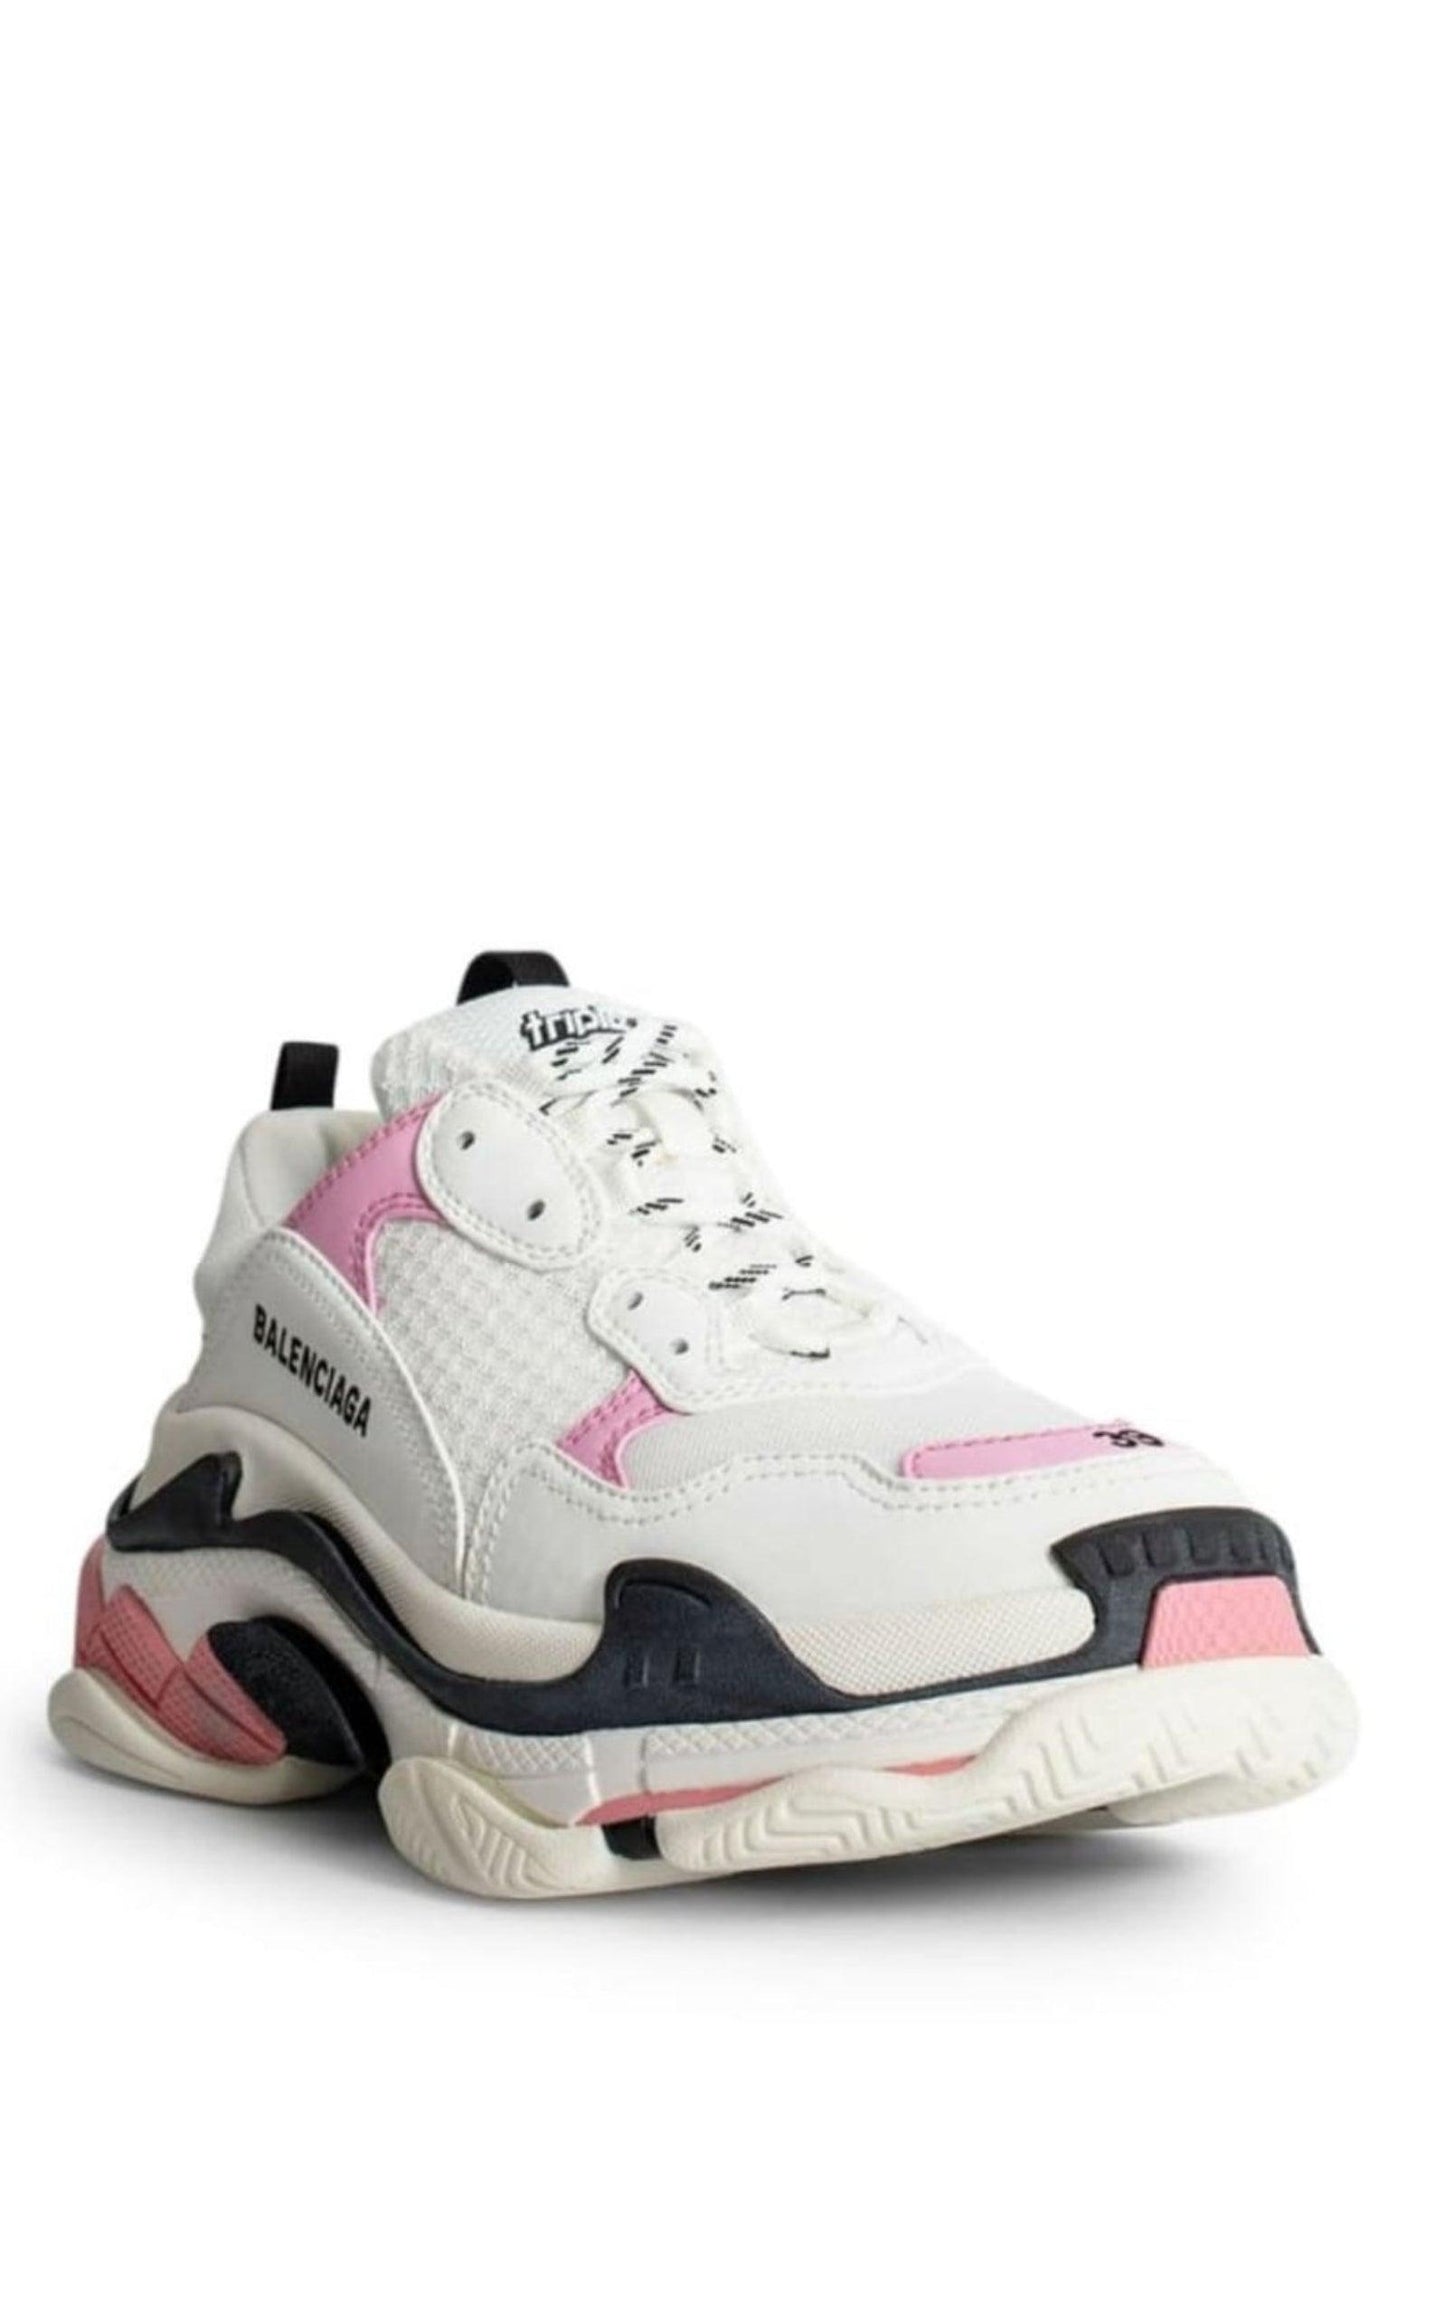  BalenciagaTriple S leather and Mesh Sneakers - Runway Catalog